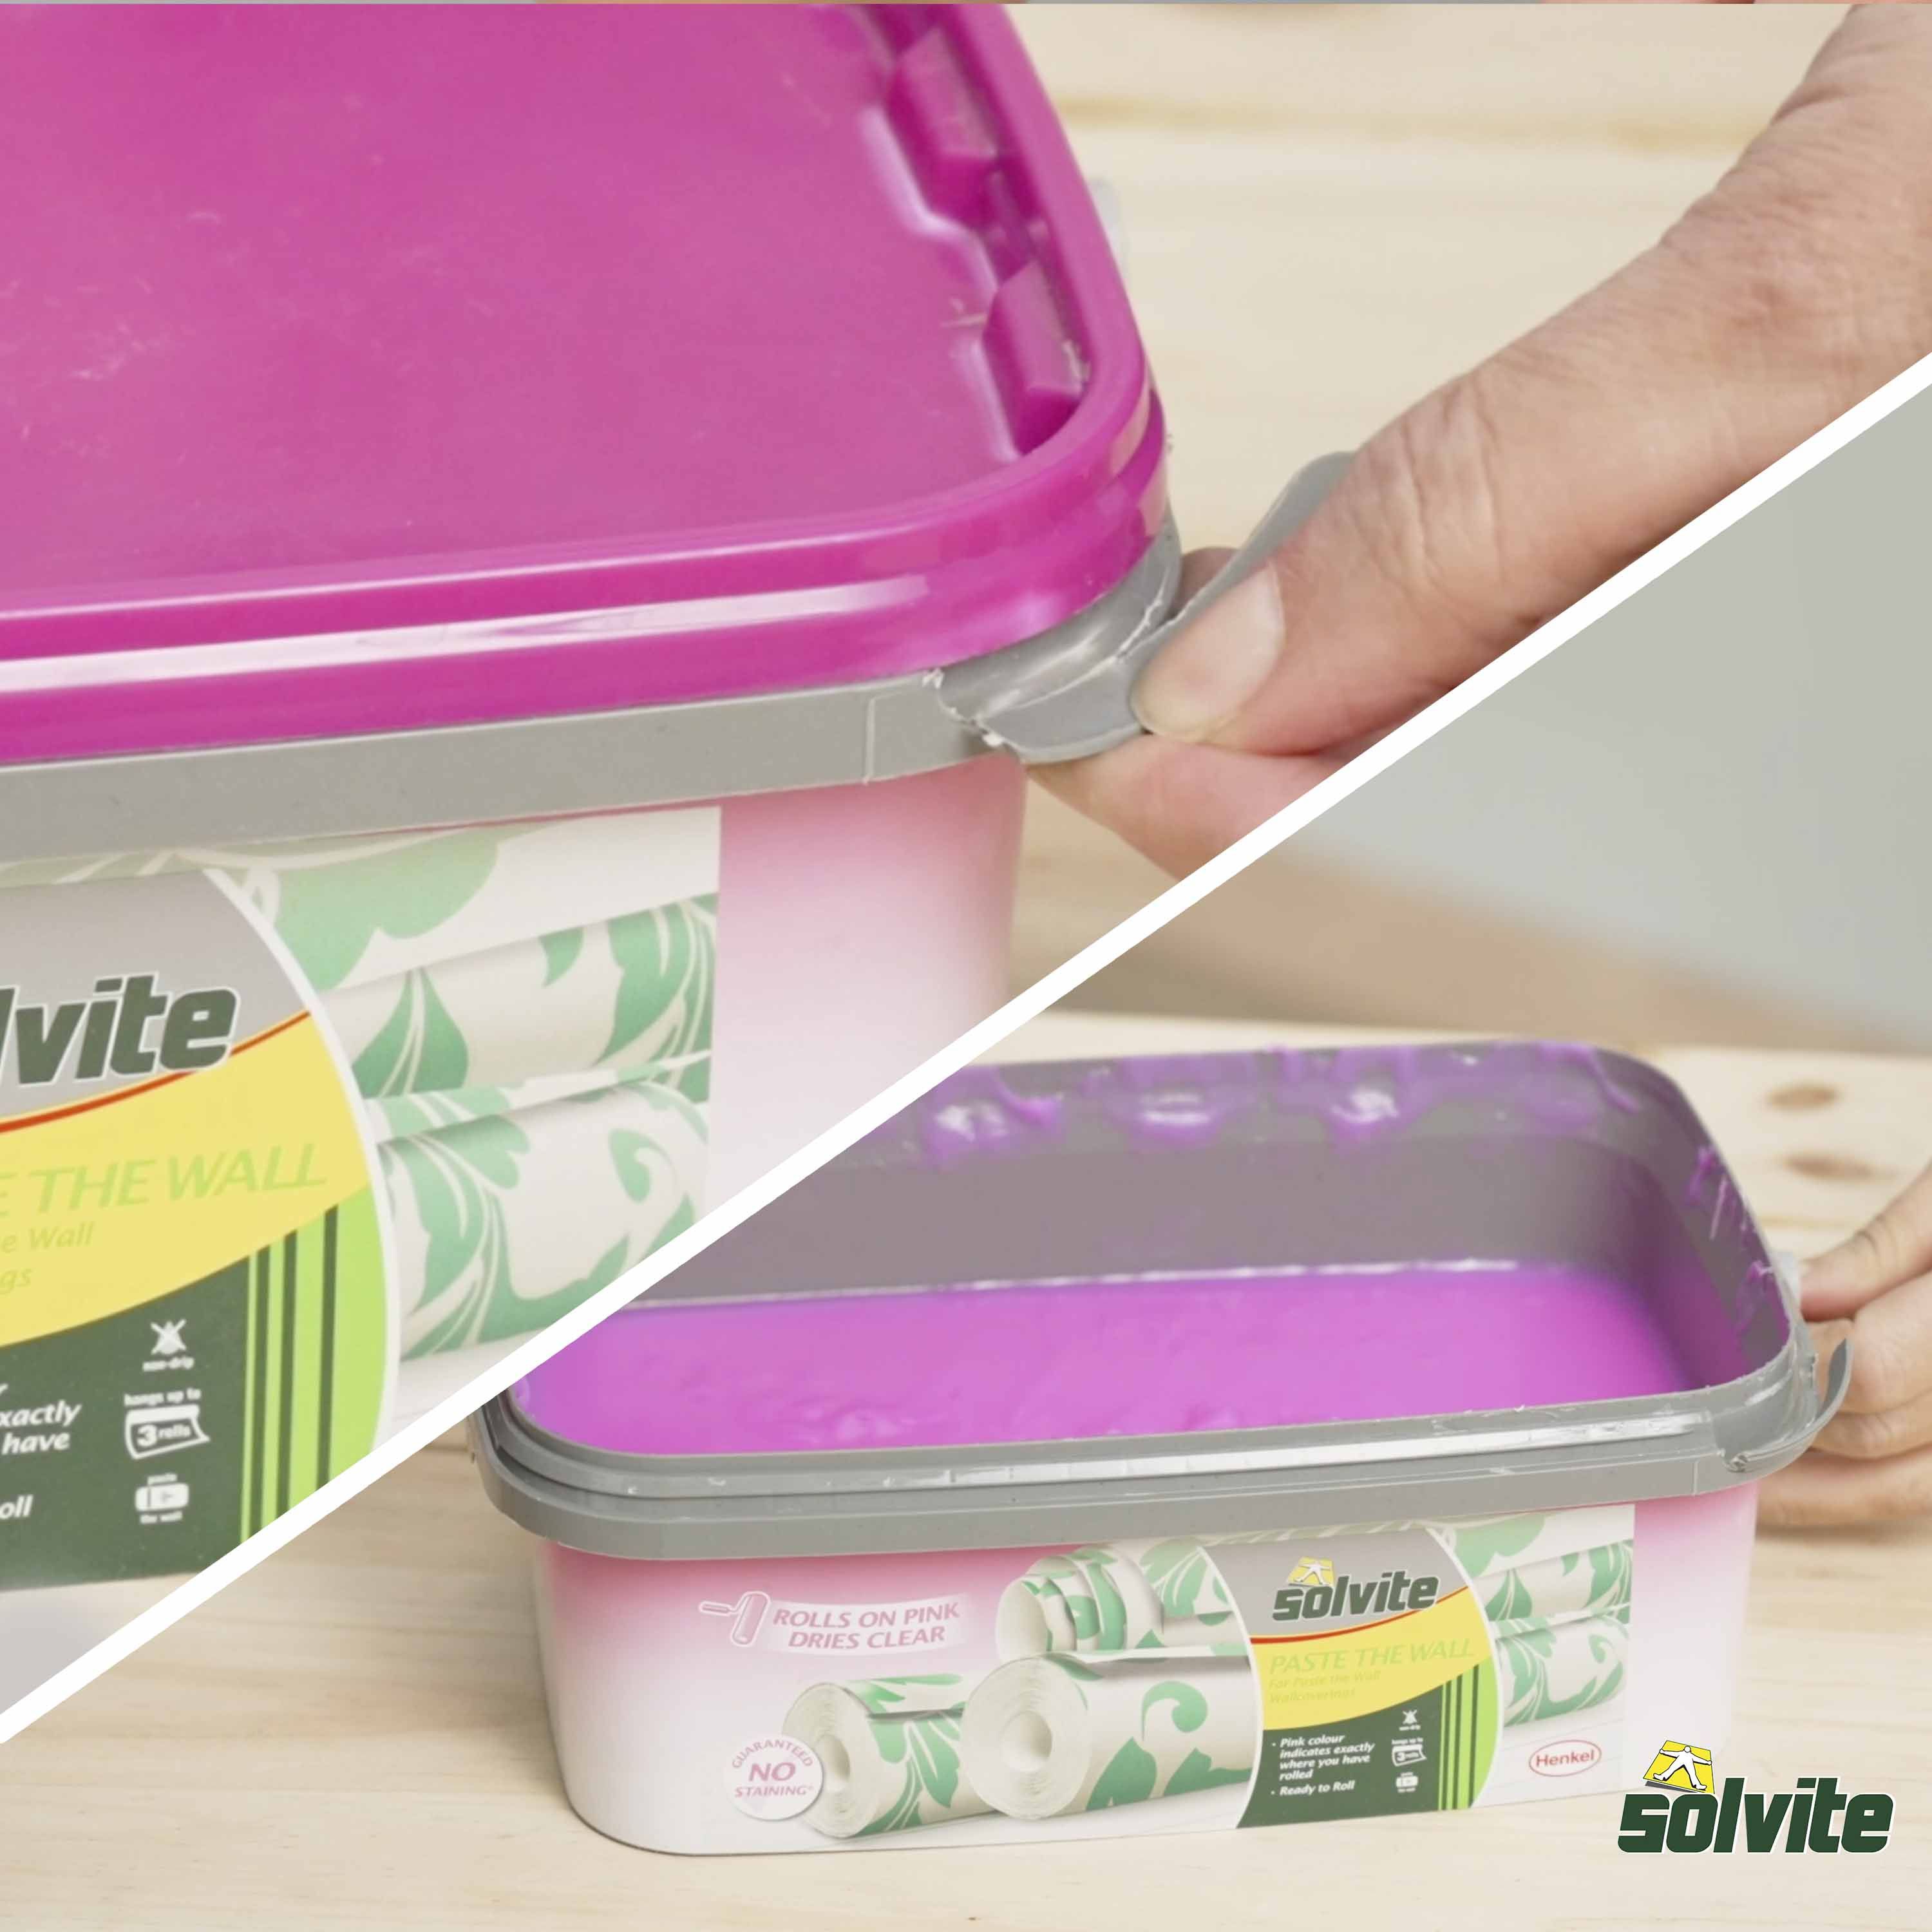 Solvite Paste the Wall Wallpaper Adhesive, Ready-Mixed, Pink, Dries Clear,  3-Roll Bucket 